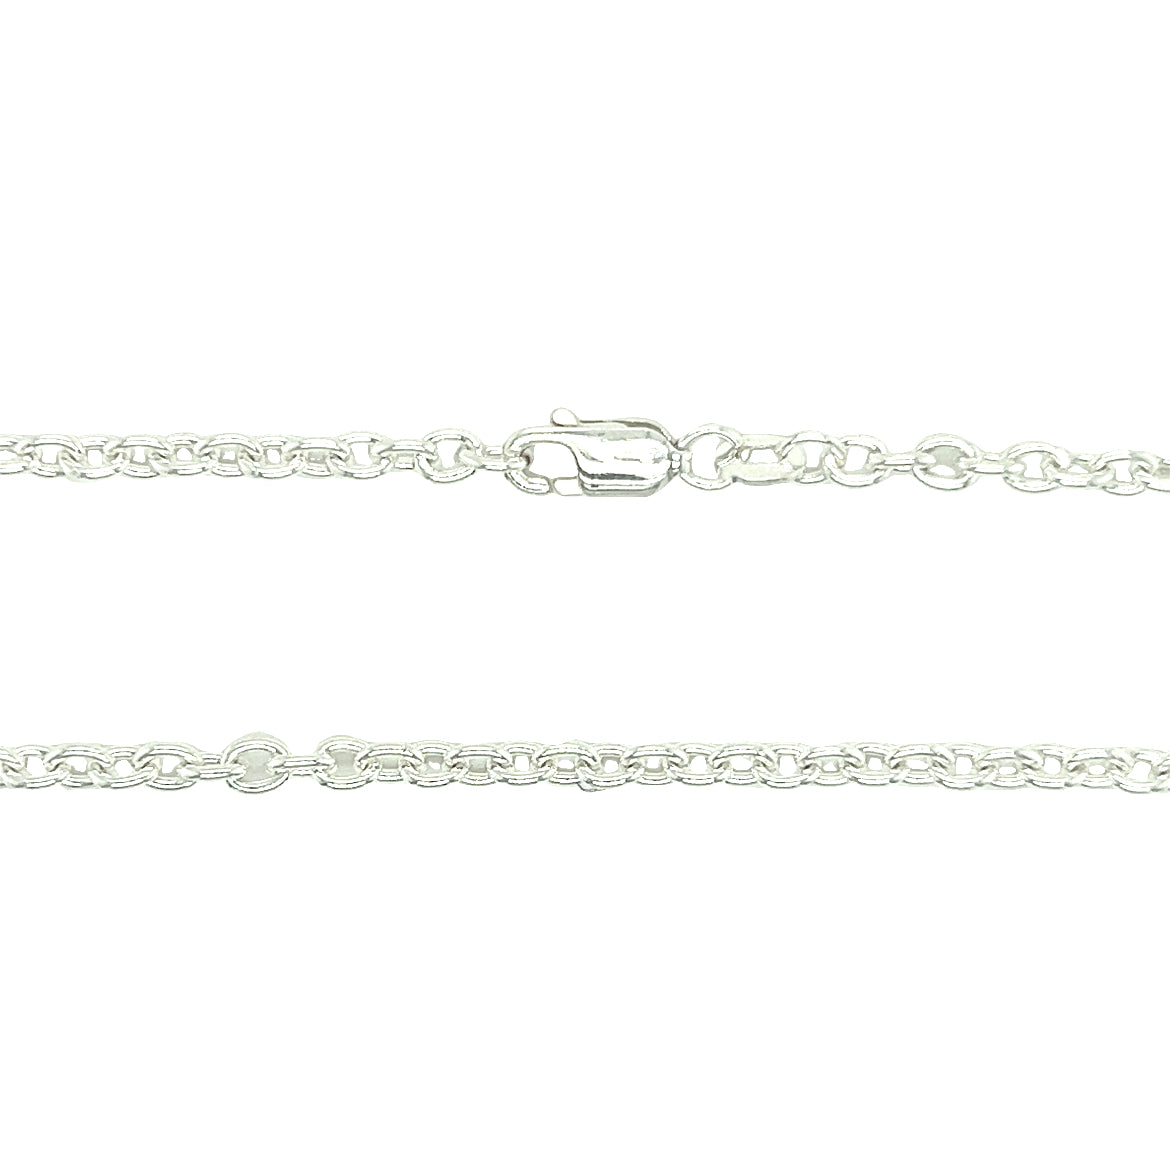 Cable Chain 2.75mm with 24in of Length in Sterling Silver Chain and Clasp View